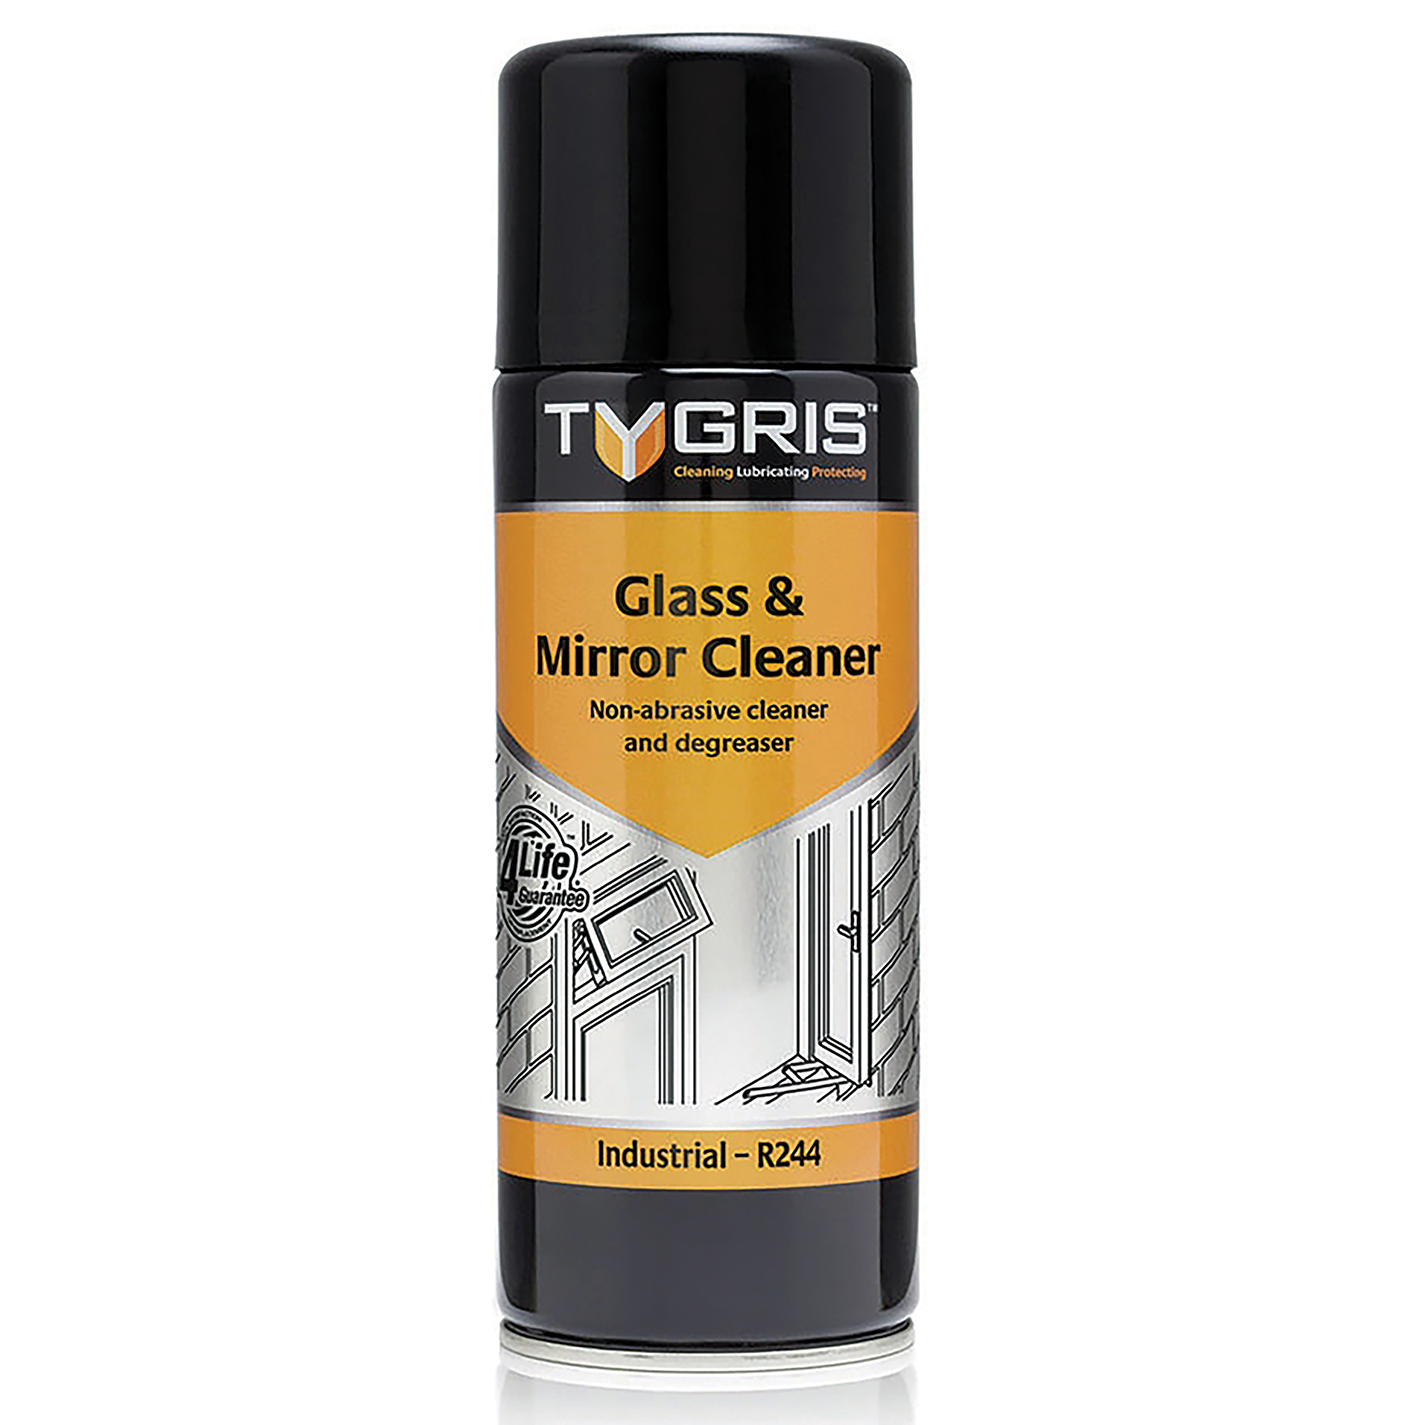 GLASS & MIRROR CLEANER